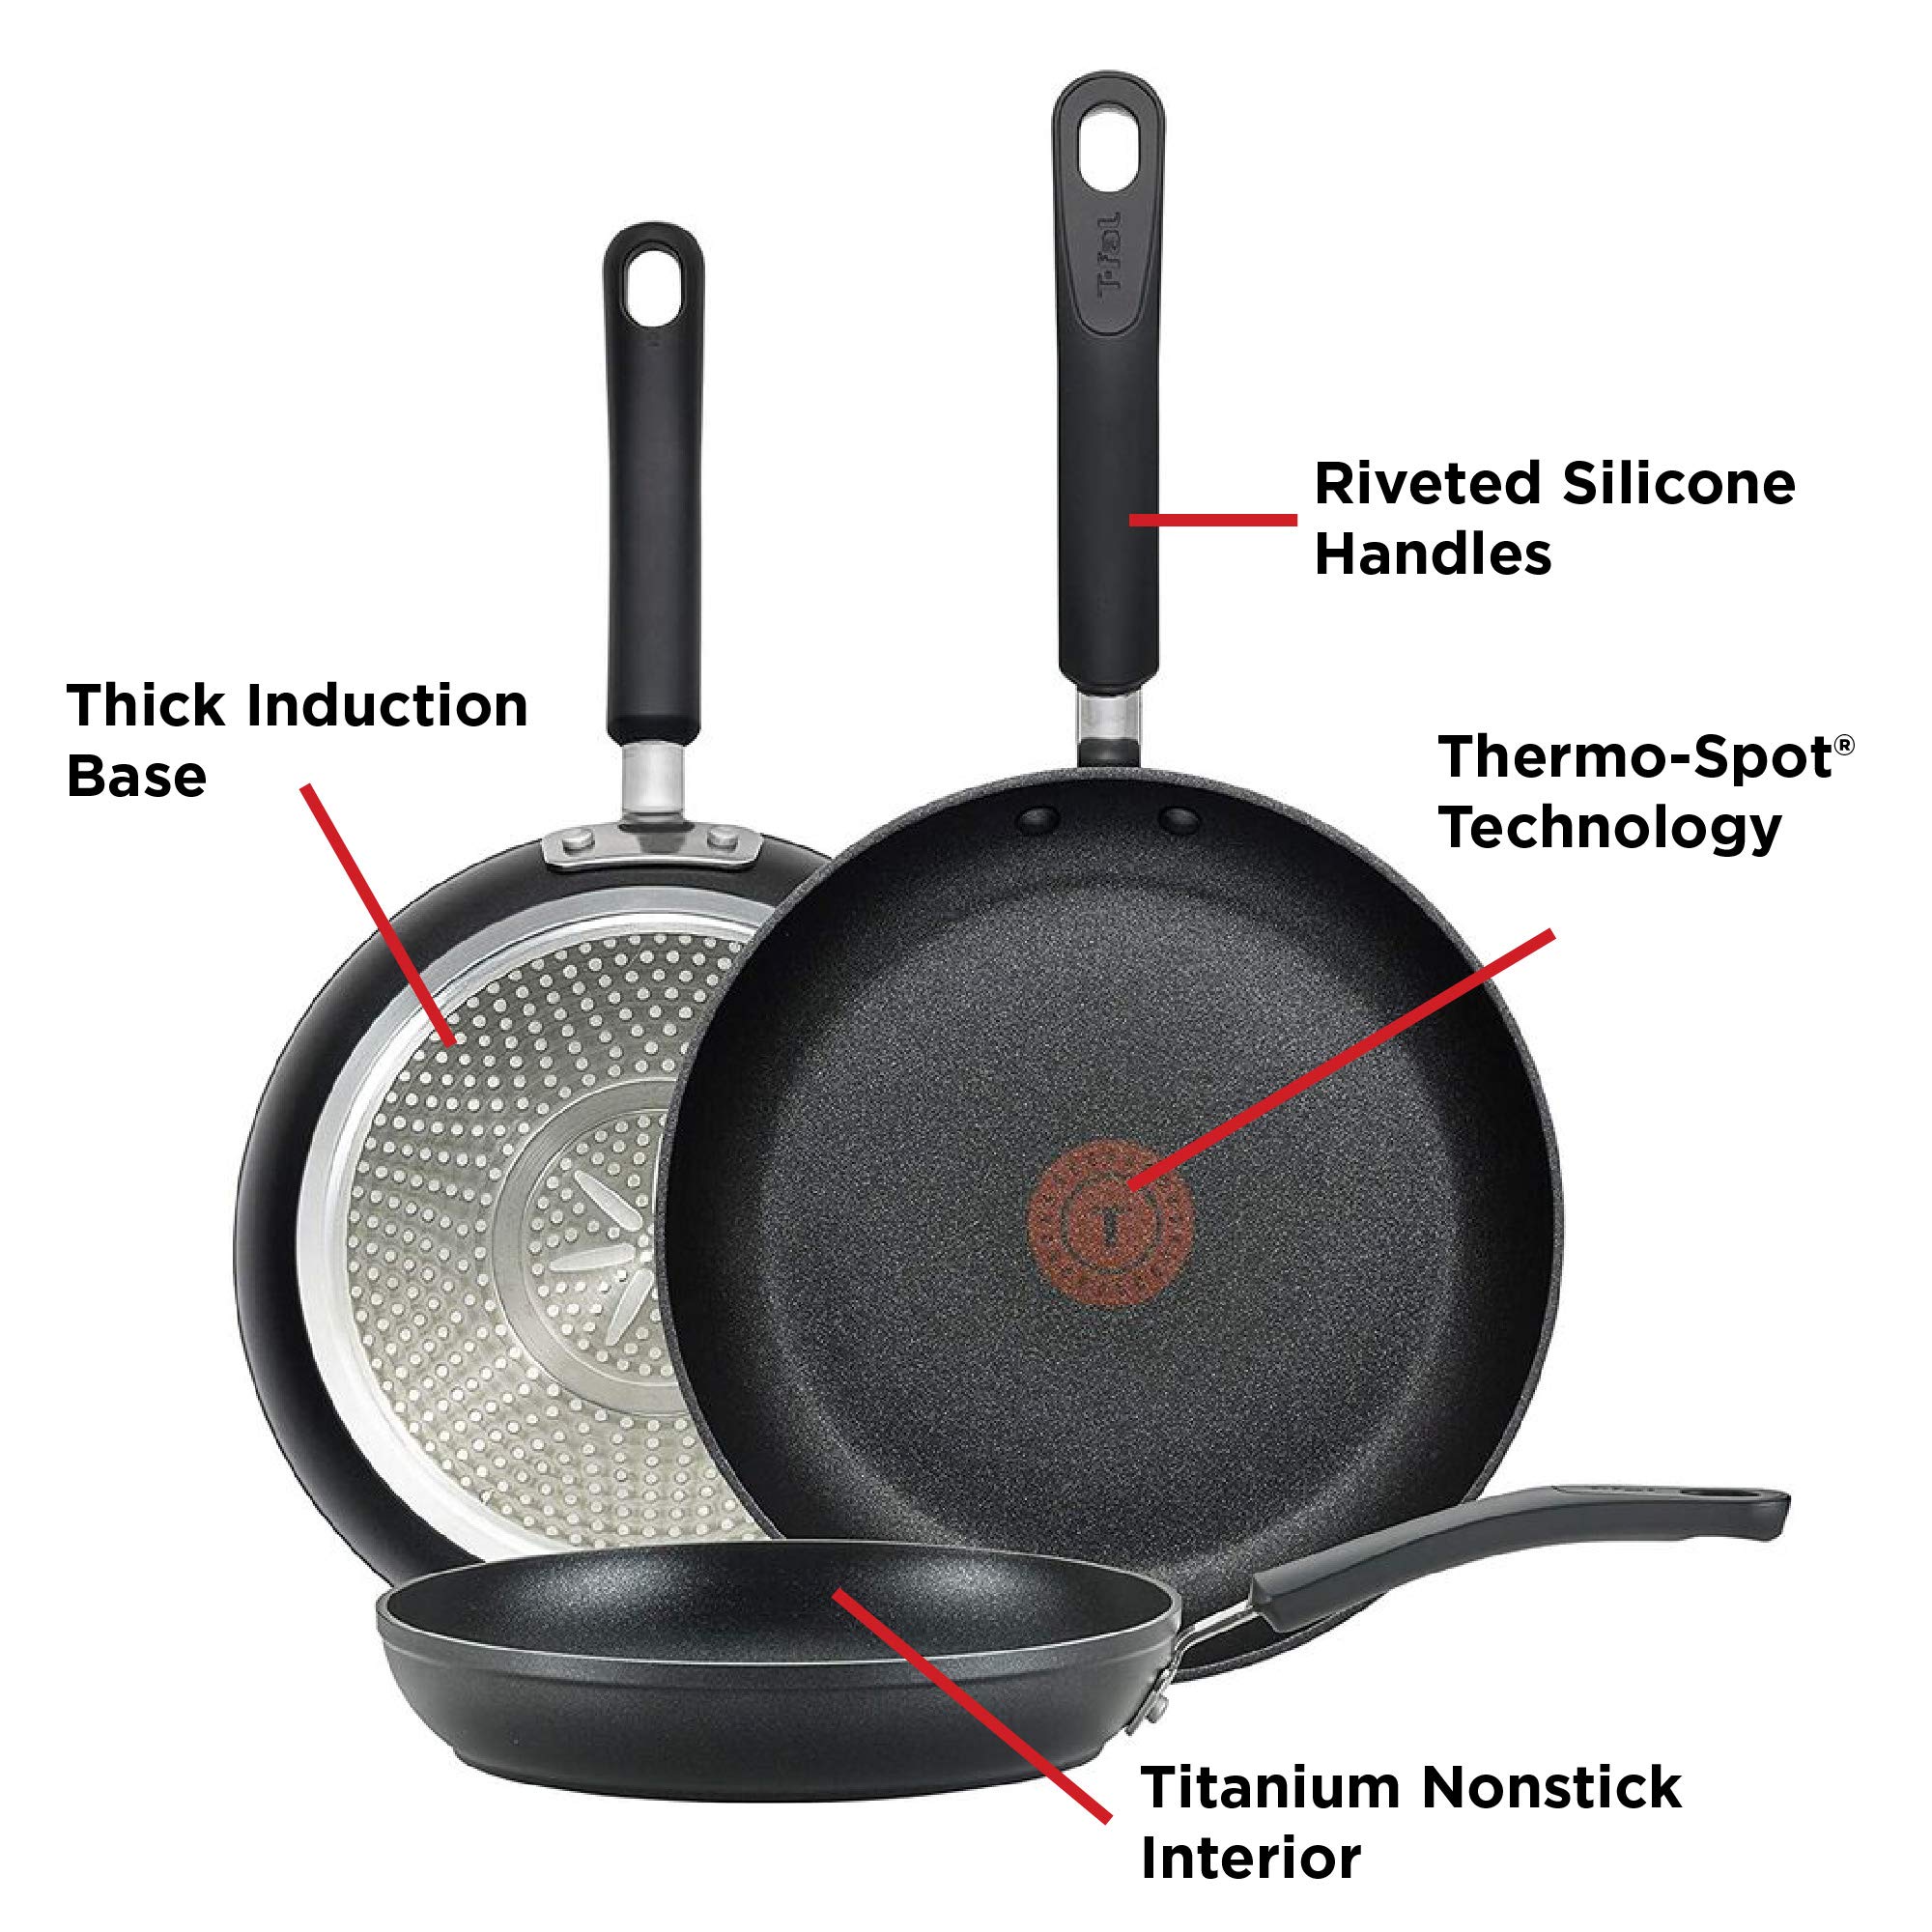 T-fal Experience Nonstick 3 Piece Fry Pan Set 8, 10.25, 12 Inch Induction Cookware, Pots and Pans, Dishwasher Safe Black